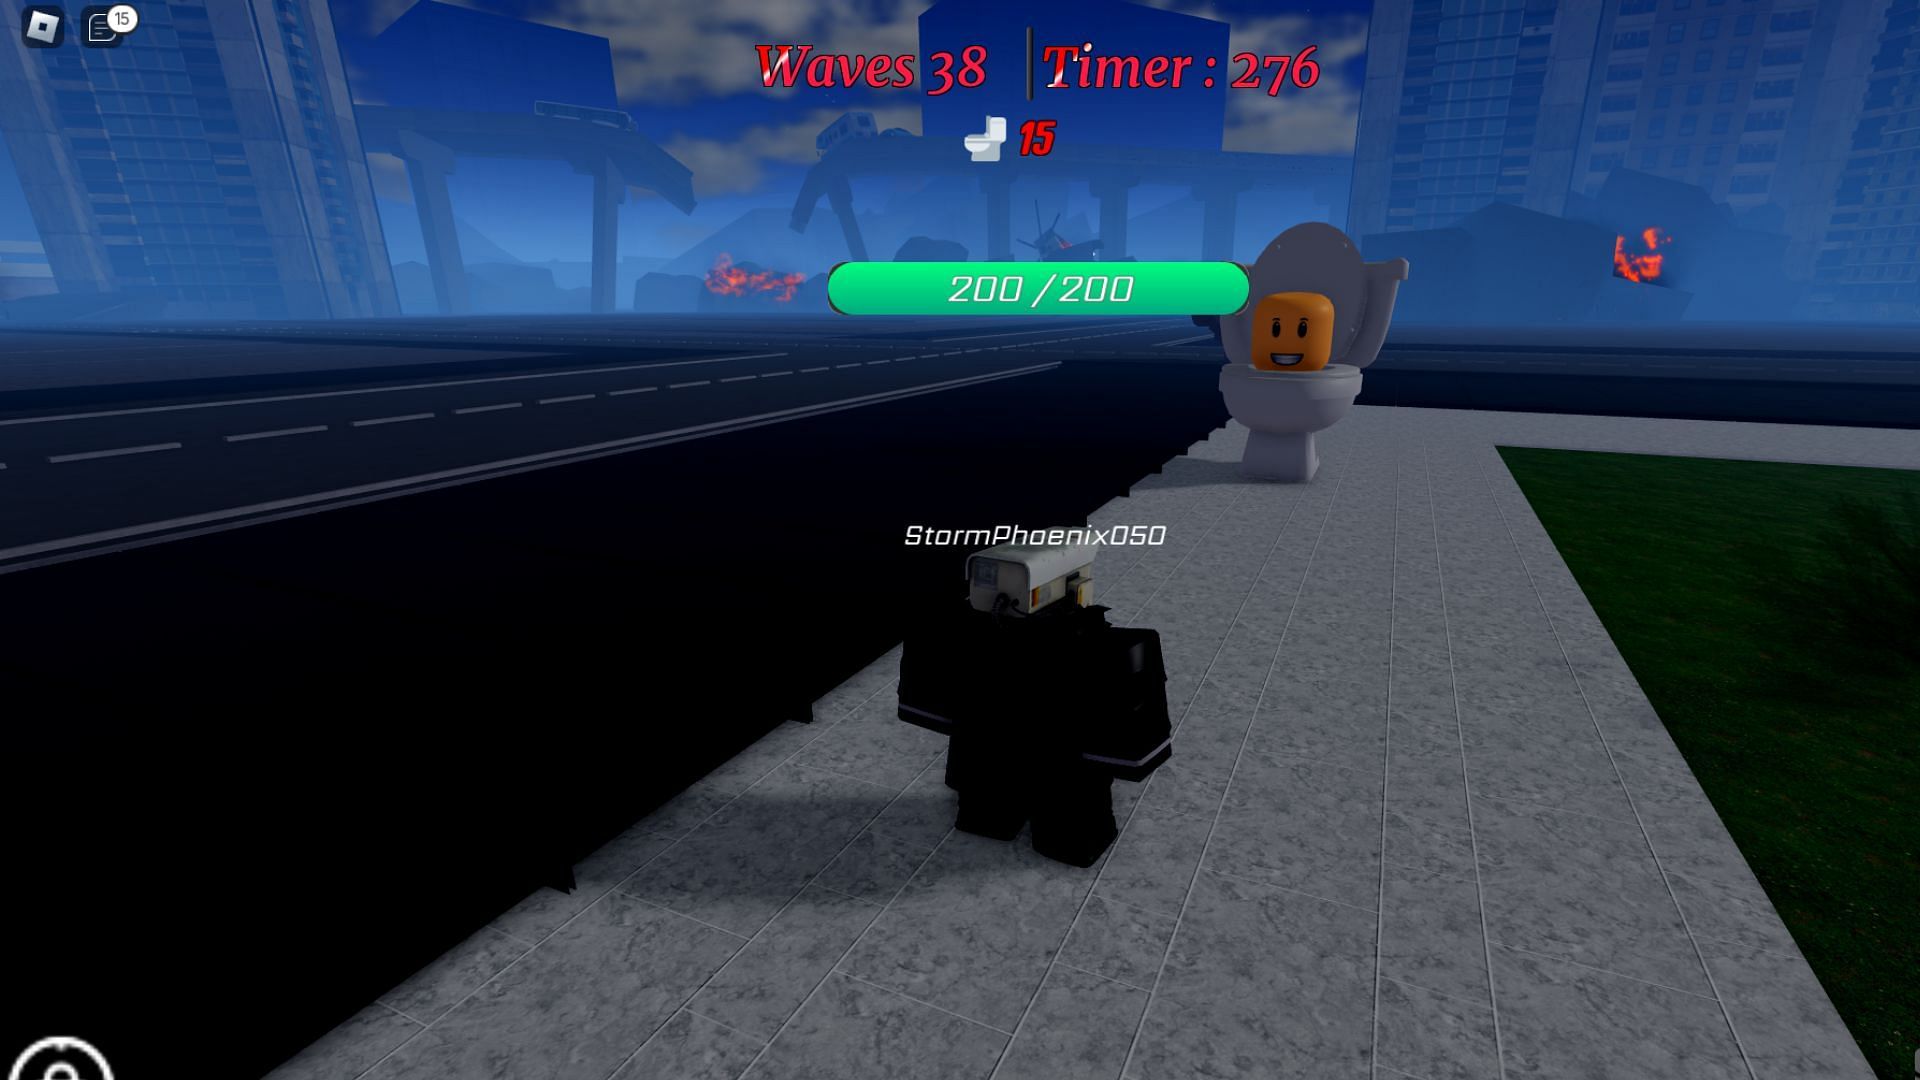 You must coordinate with your teammates to clear out enemies efficiently in ST: Blockade Reboot (Image via Roblox)